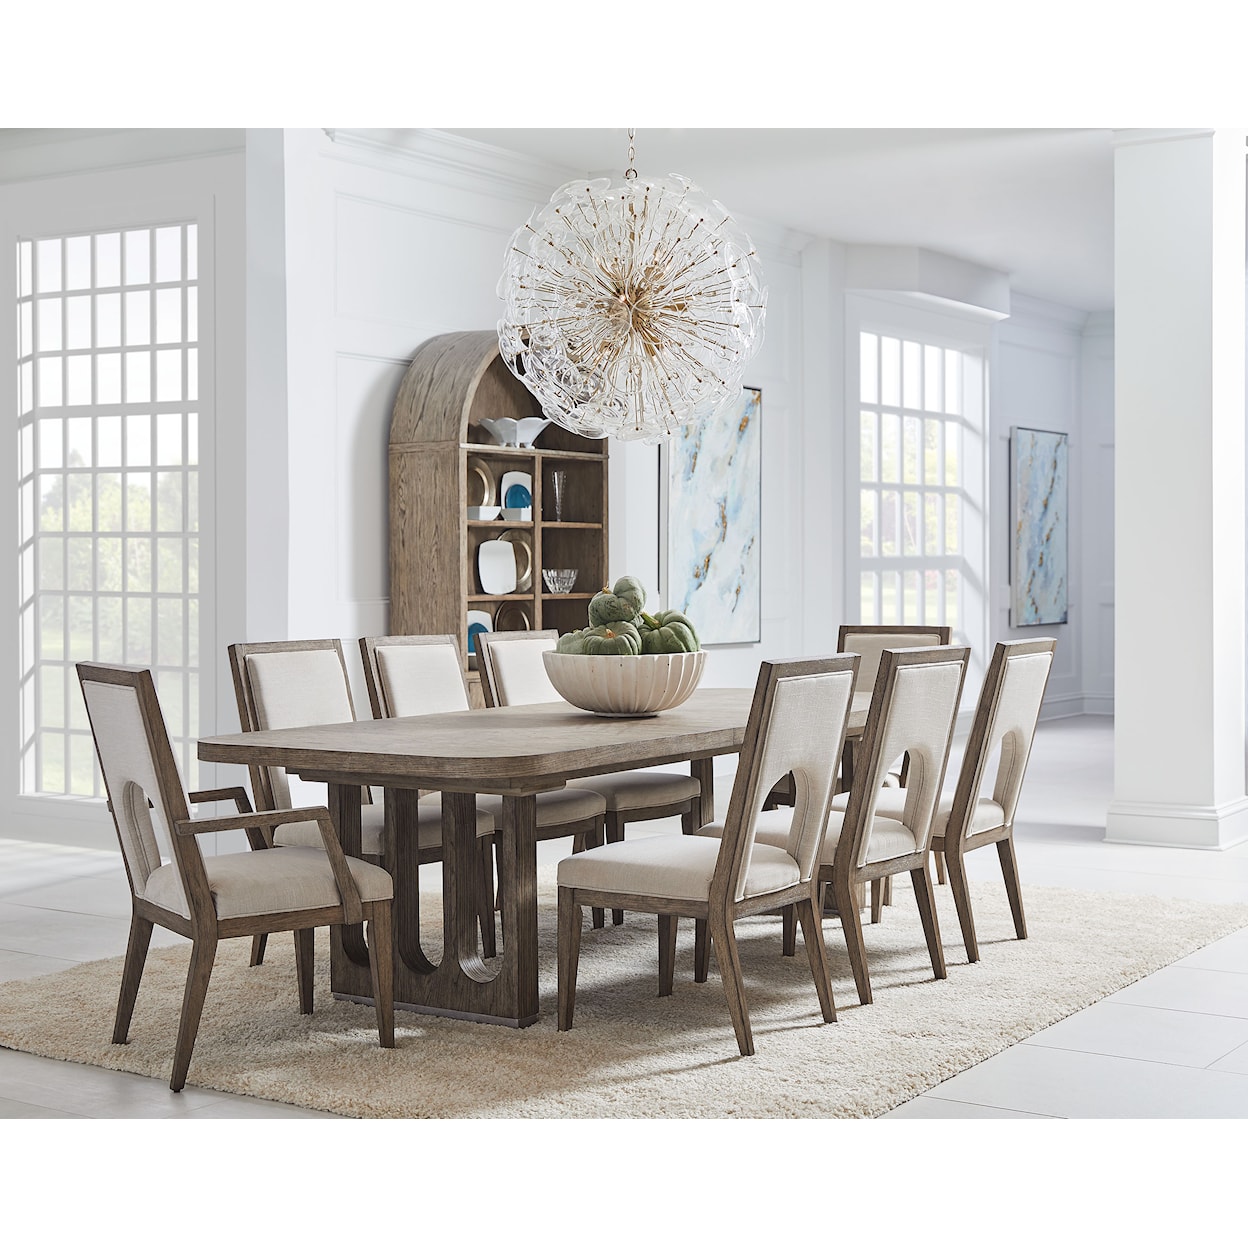 A.R.T. Furniture Inc Vault Dining Table